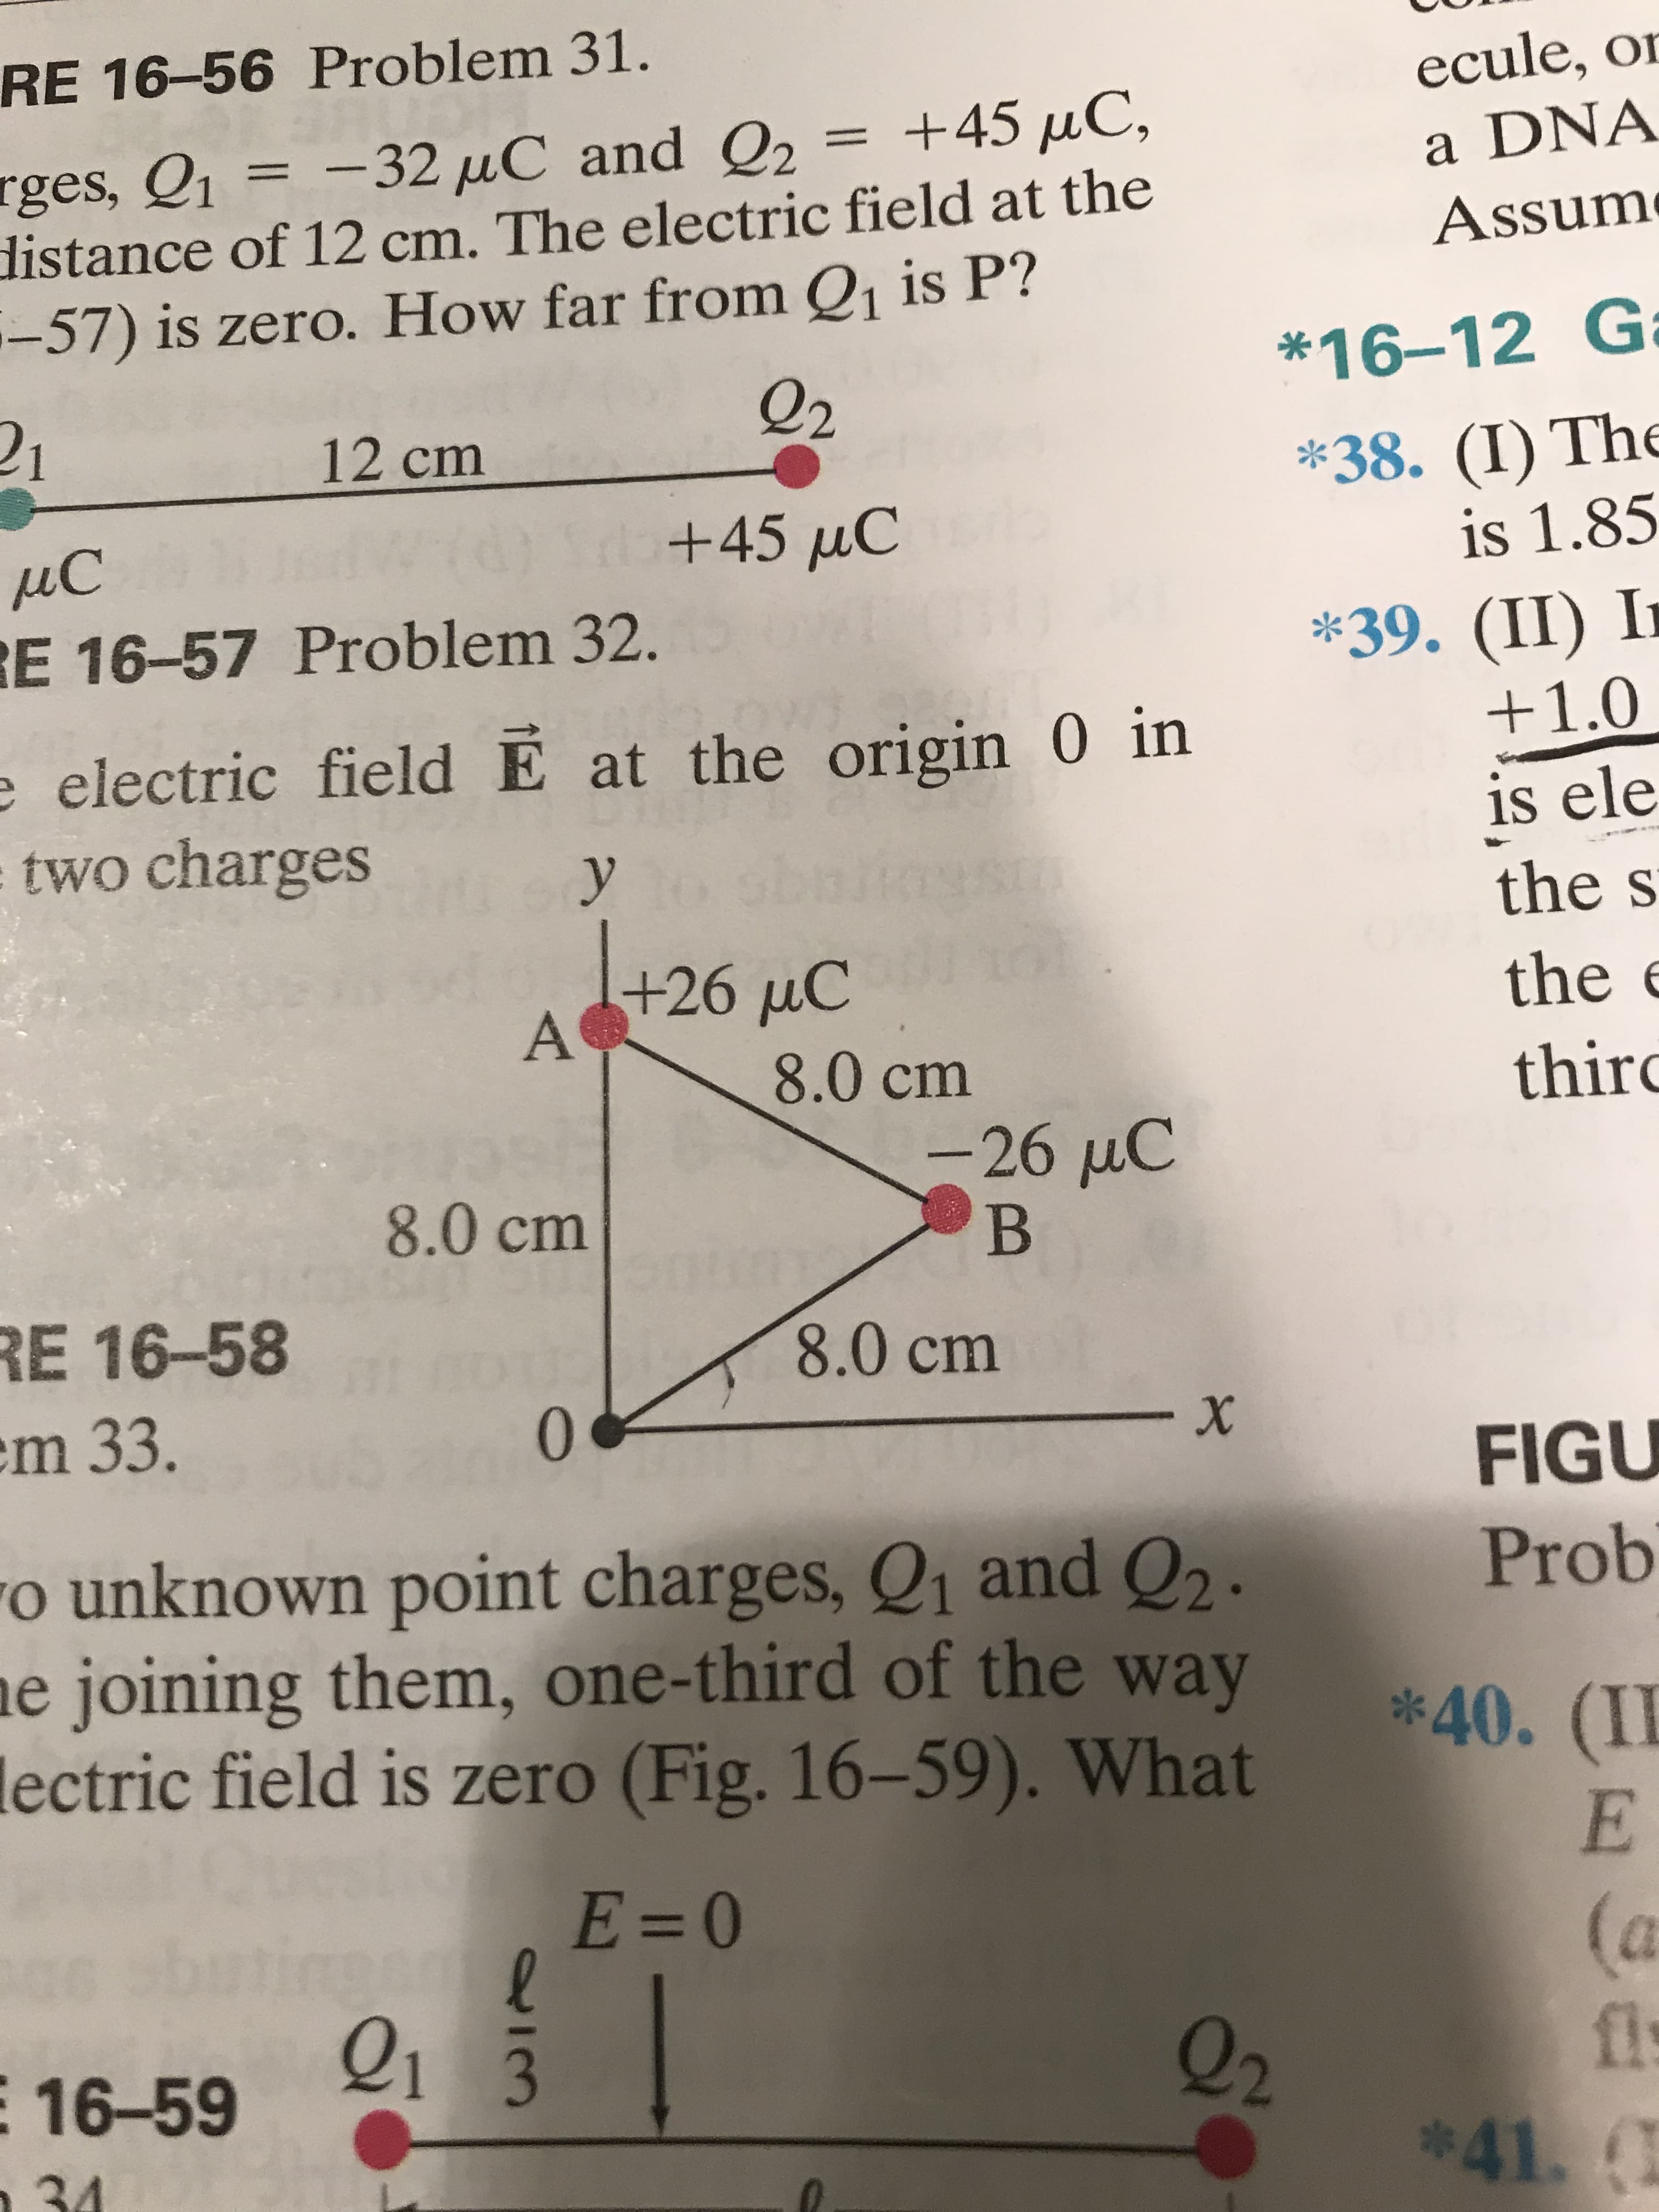 RE 16-56 Problem 31.
ecule, or
+45 µC,
rges, Q1 = -32 µC and Q2 =
distance of 12 cm. The electric field at the
-57) is zero. How far from Q1 is P?
a DNA
Assum
*16-12 Ga
Q2
12 cm
*38. (I) Th
is 1.85
+45 uC
ИС
RE 16-57 Problem 32.
*39. (II) I
+1.0
e electric field E at the origin 0 in
two charges
is ele
sboik
the s
+26µC
A
the e
8.0cm
third
-26µC
8.0 cm
RE 16-58
em 33.
8.0 cm
FIGU
ro unknown point charges, Q1 and Q2 .
ne joining them, one-third of the way
lectric field is zero (Fig. 16–59). What
Prob
*40. (II
E=0
(a
fl
*41.1
sbut
Q1 3
Q2
E 16-59
n34
